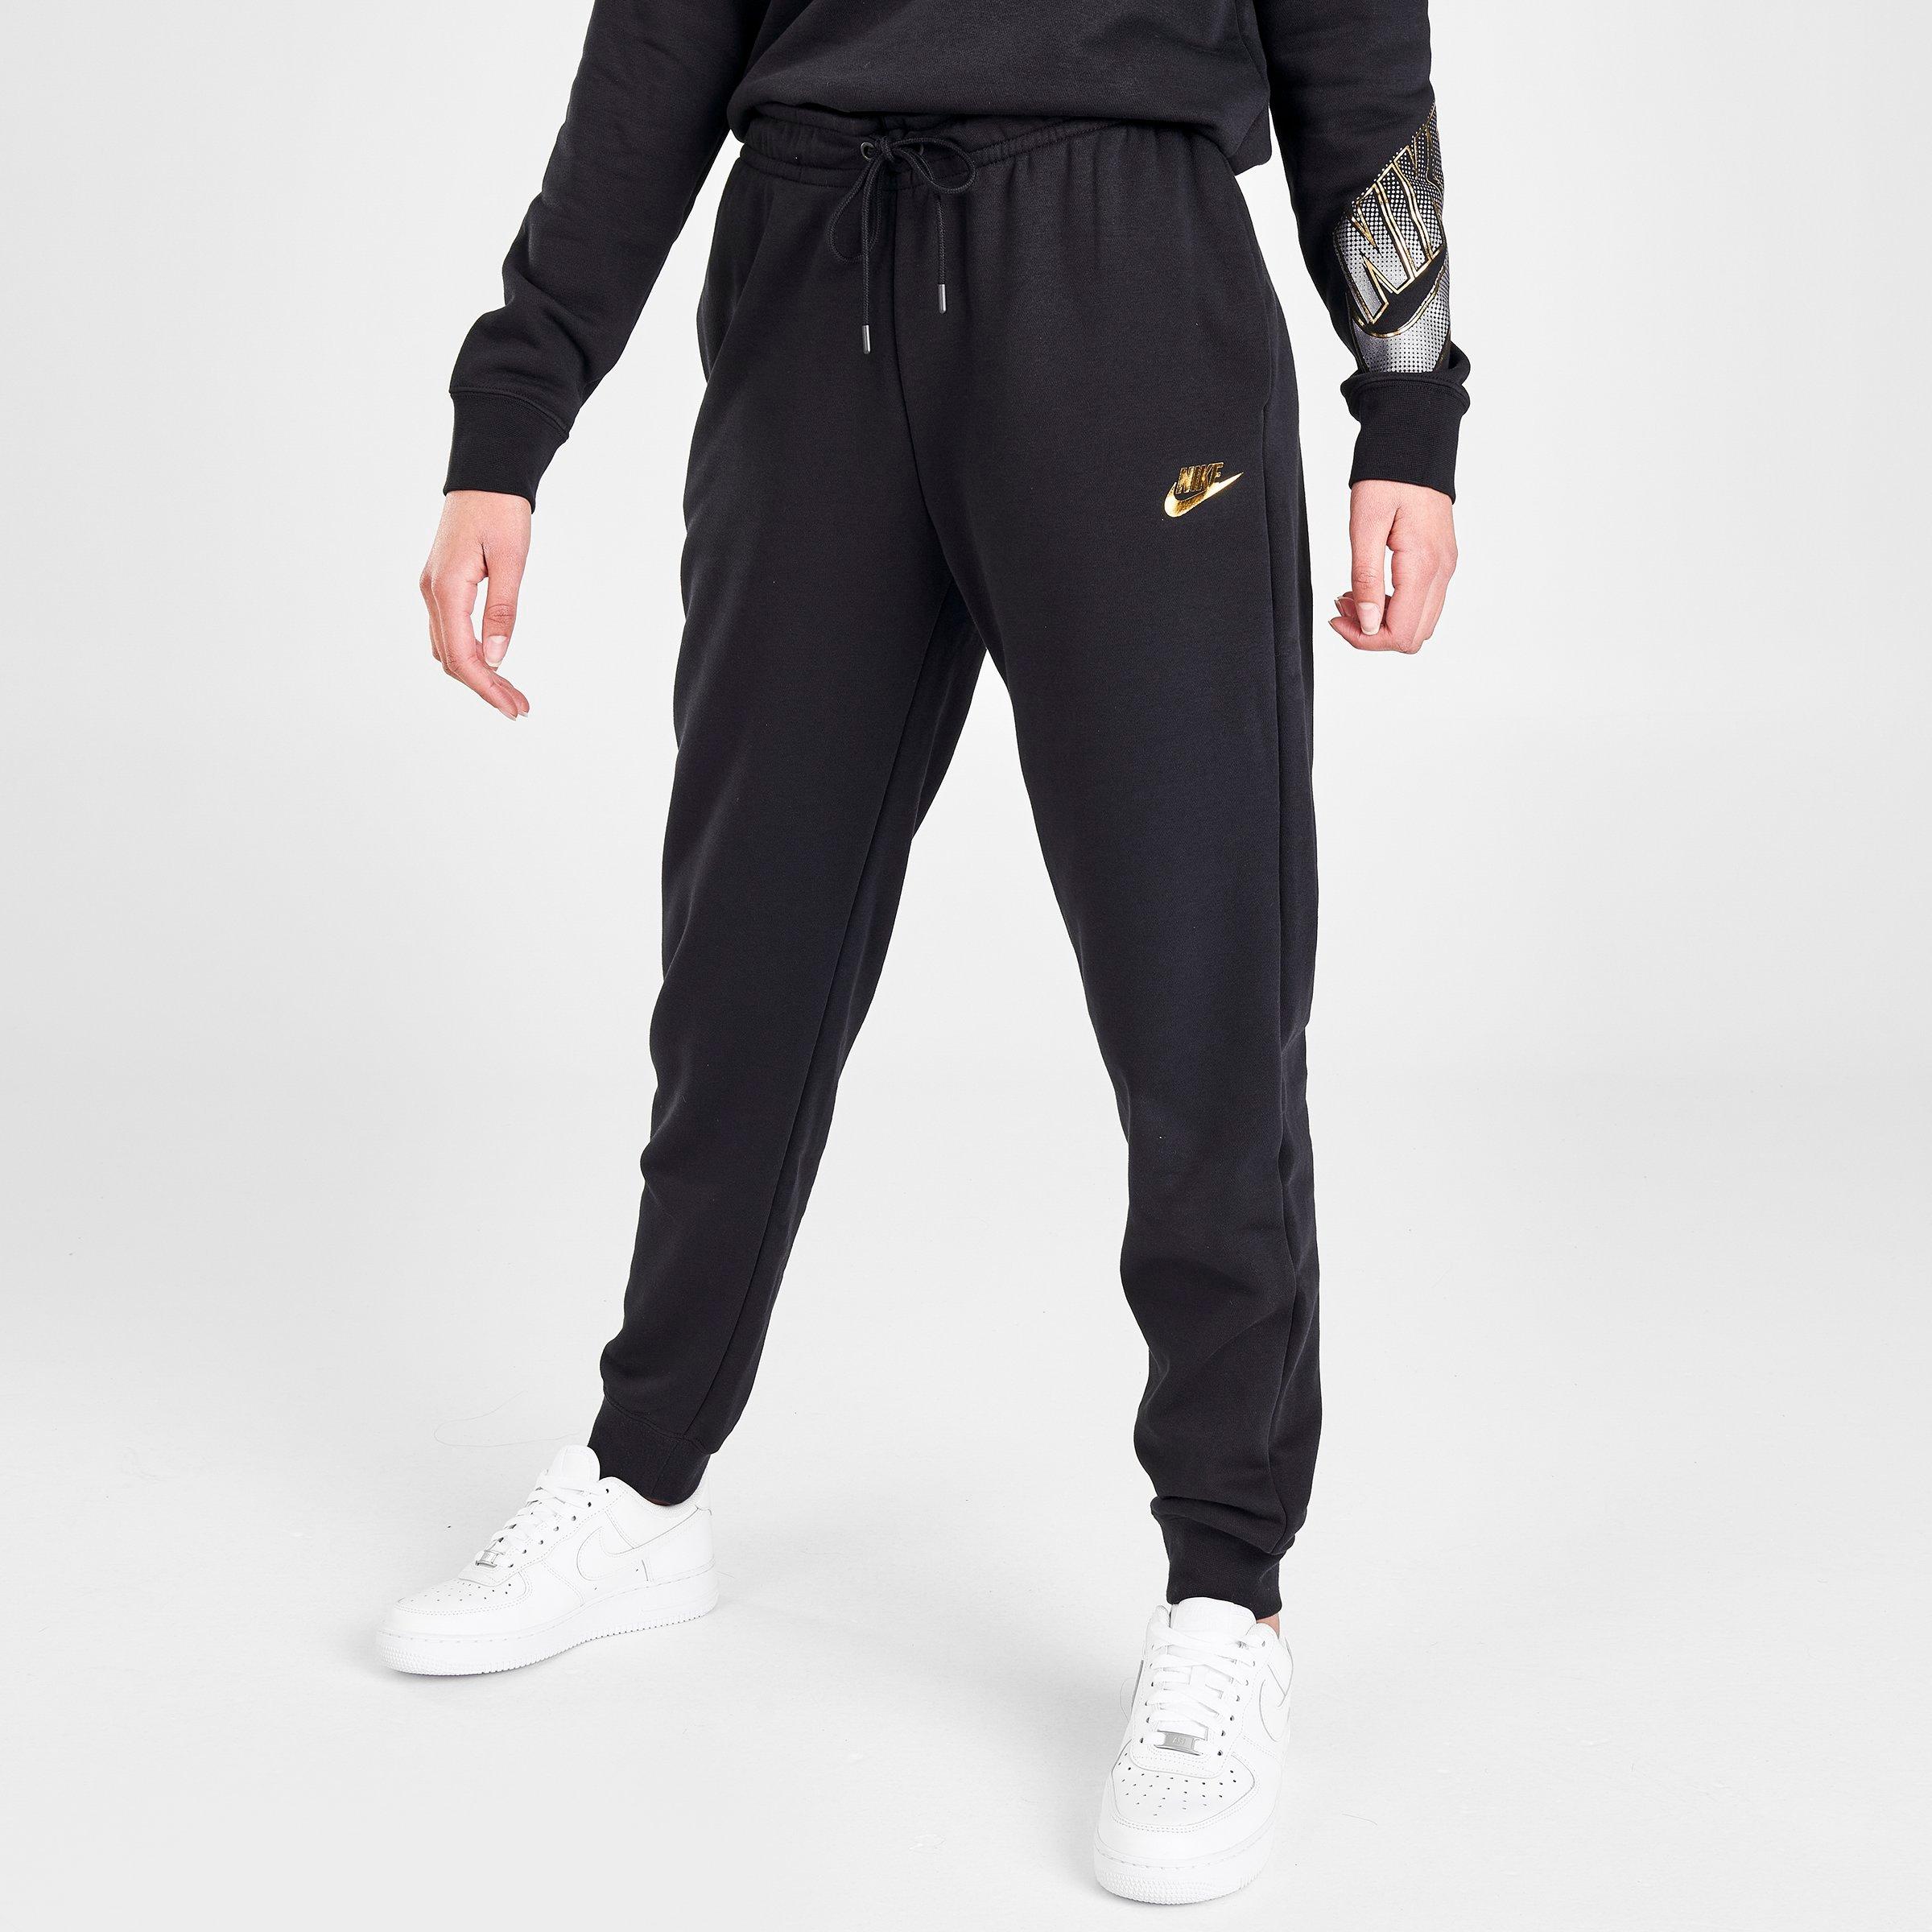 nike women's black and gold joggers